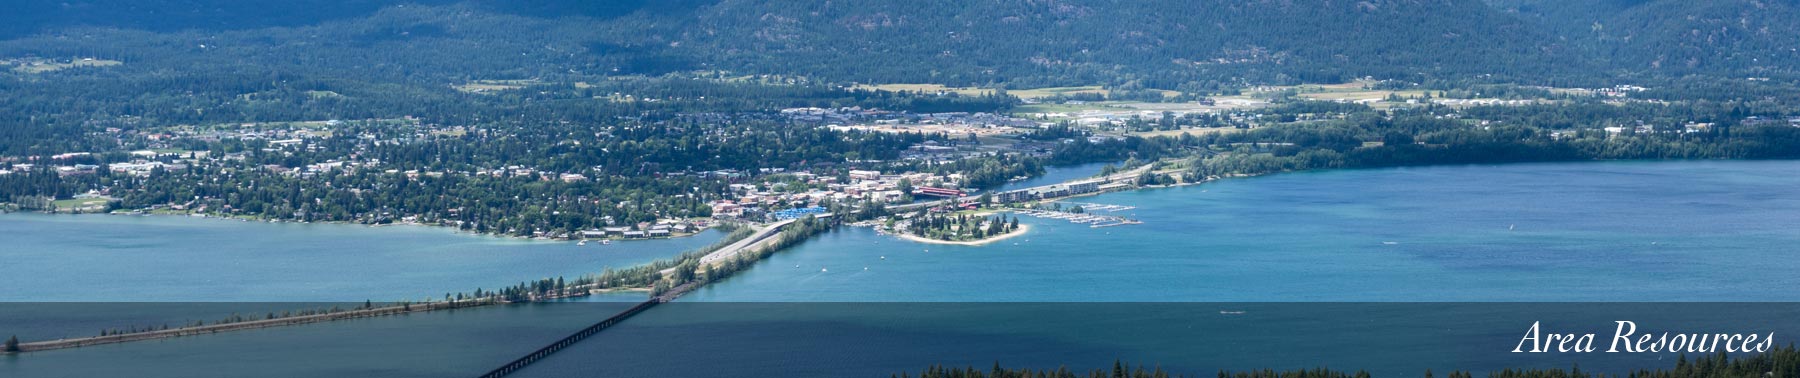 Sandpoint Area Resources and Links